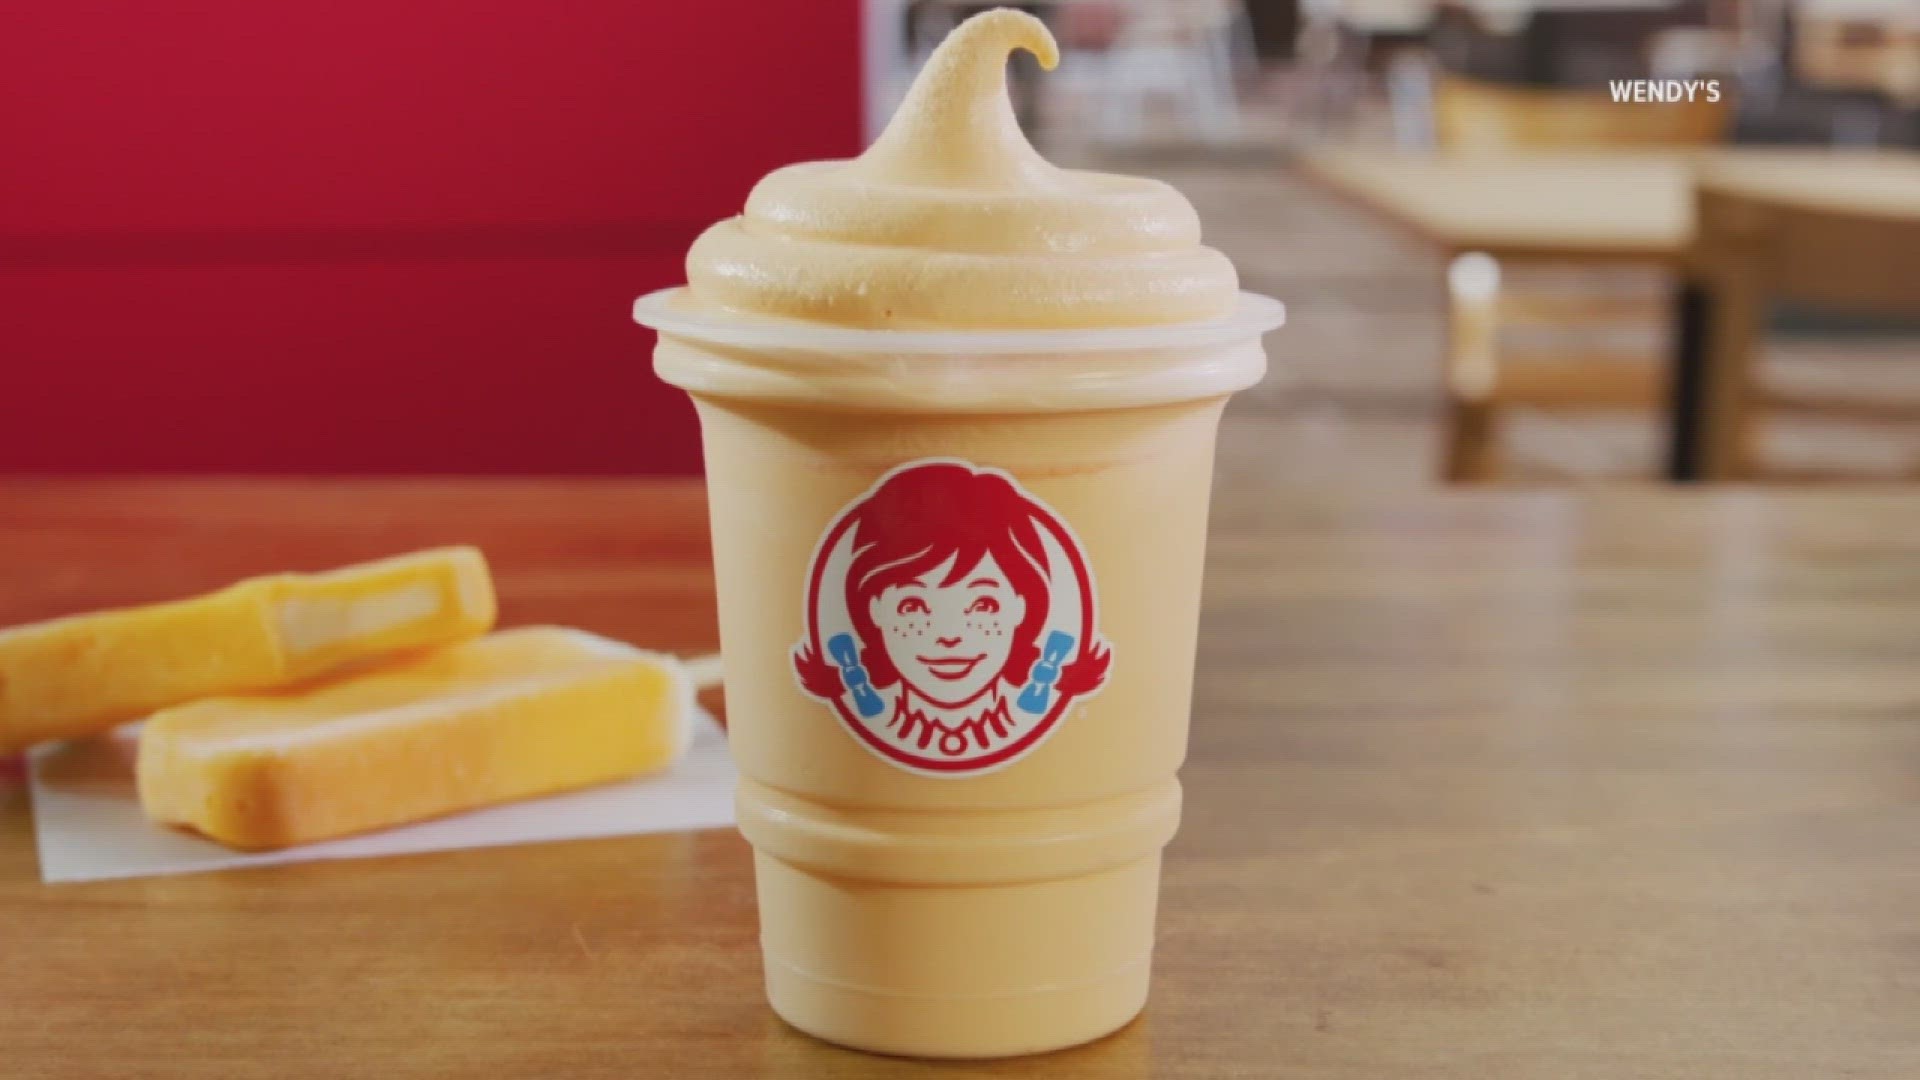 Wendy's is adding to their famous Frosty Menu. Starting Mar. 19  the "Orange Dreamsicle" Frosty will now be an option.